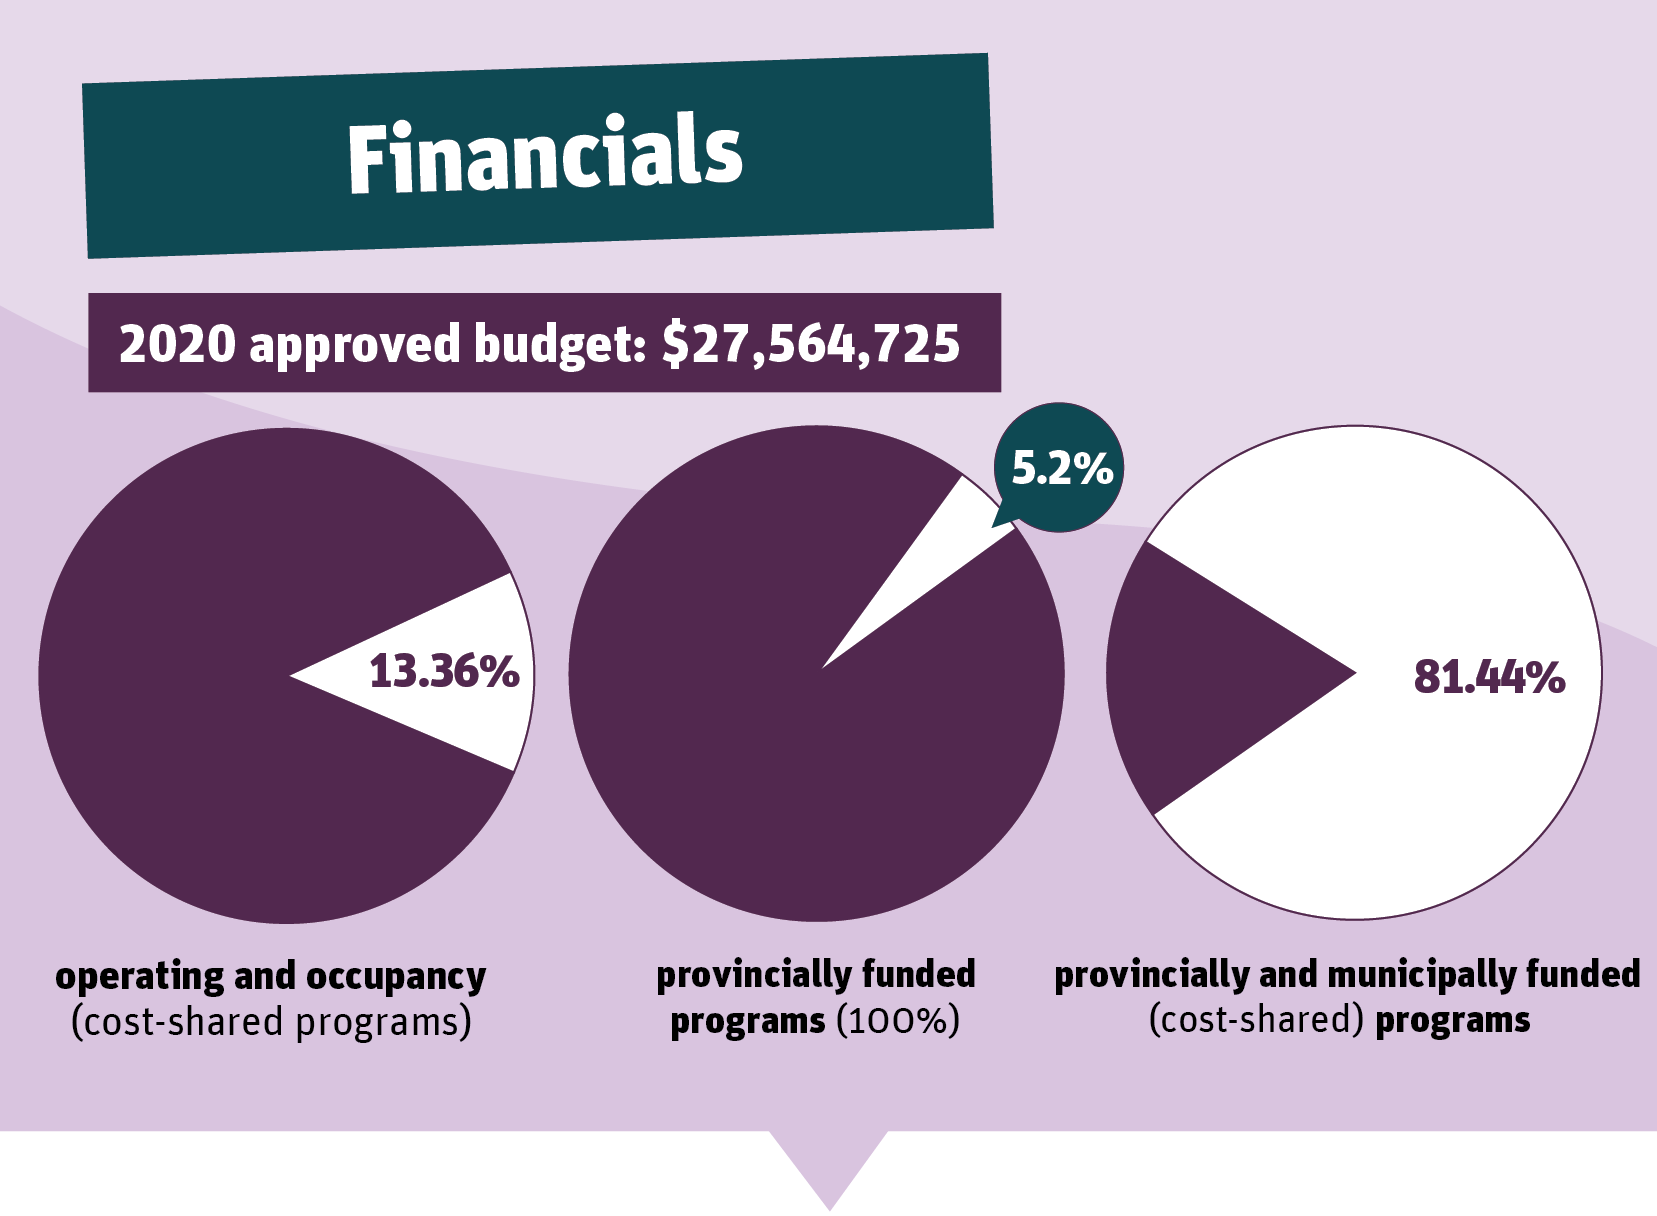 Financials: 2020 approved budget: $27,564,725. Breakdown percentage of: 13.36% operating and occupancy for cost-shared ($3,683,445 actual expenses), 5.20% from 100% provincially funded public health programs ($1,433,416 actual expenses), 81.44% of cost-shared programs ($22,447,864 actual expenses).